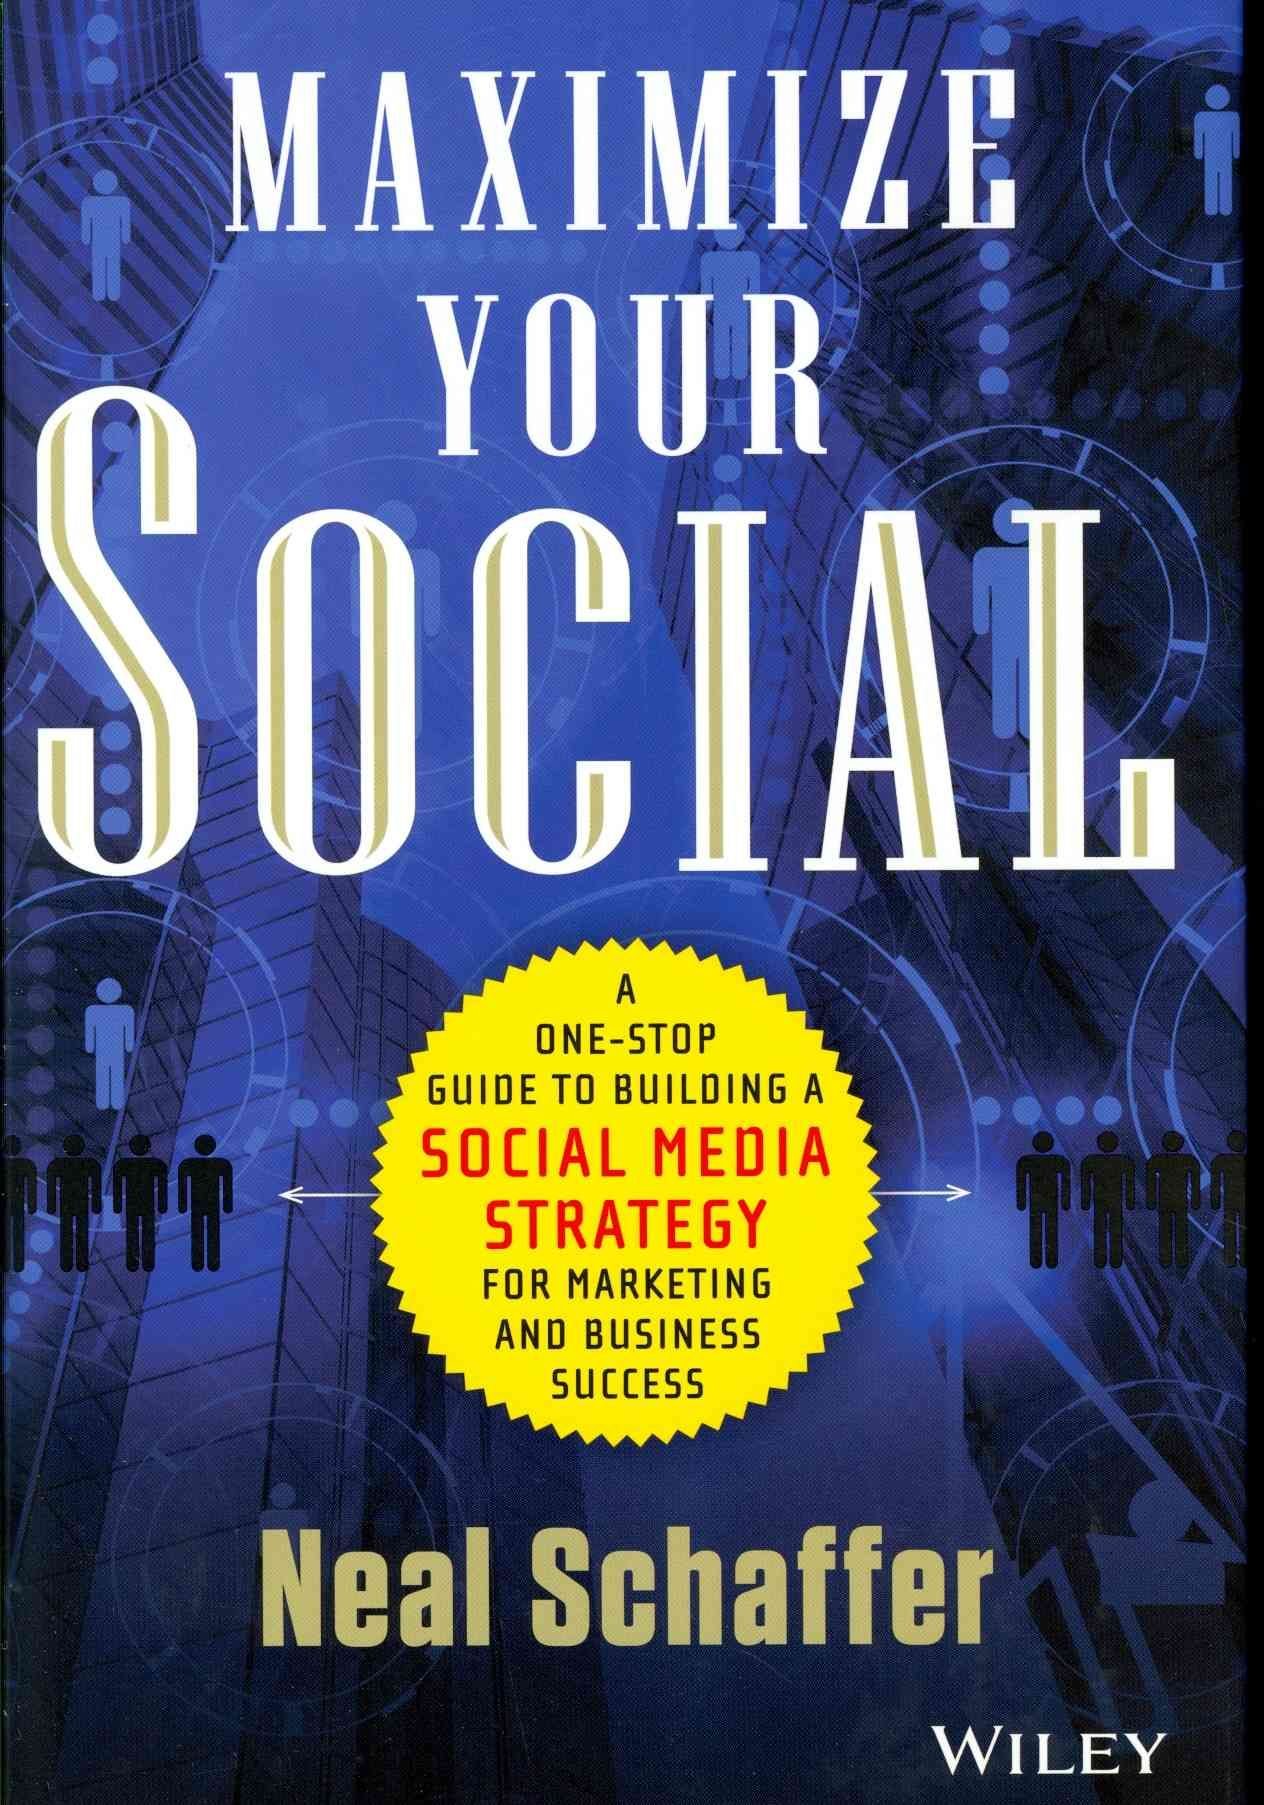 Maximize Your Social - A One-Stop Guide to Building a Social Media Strategy for Marketing and Business Success